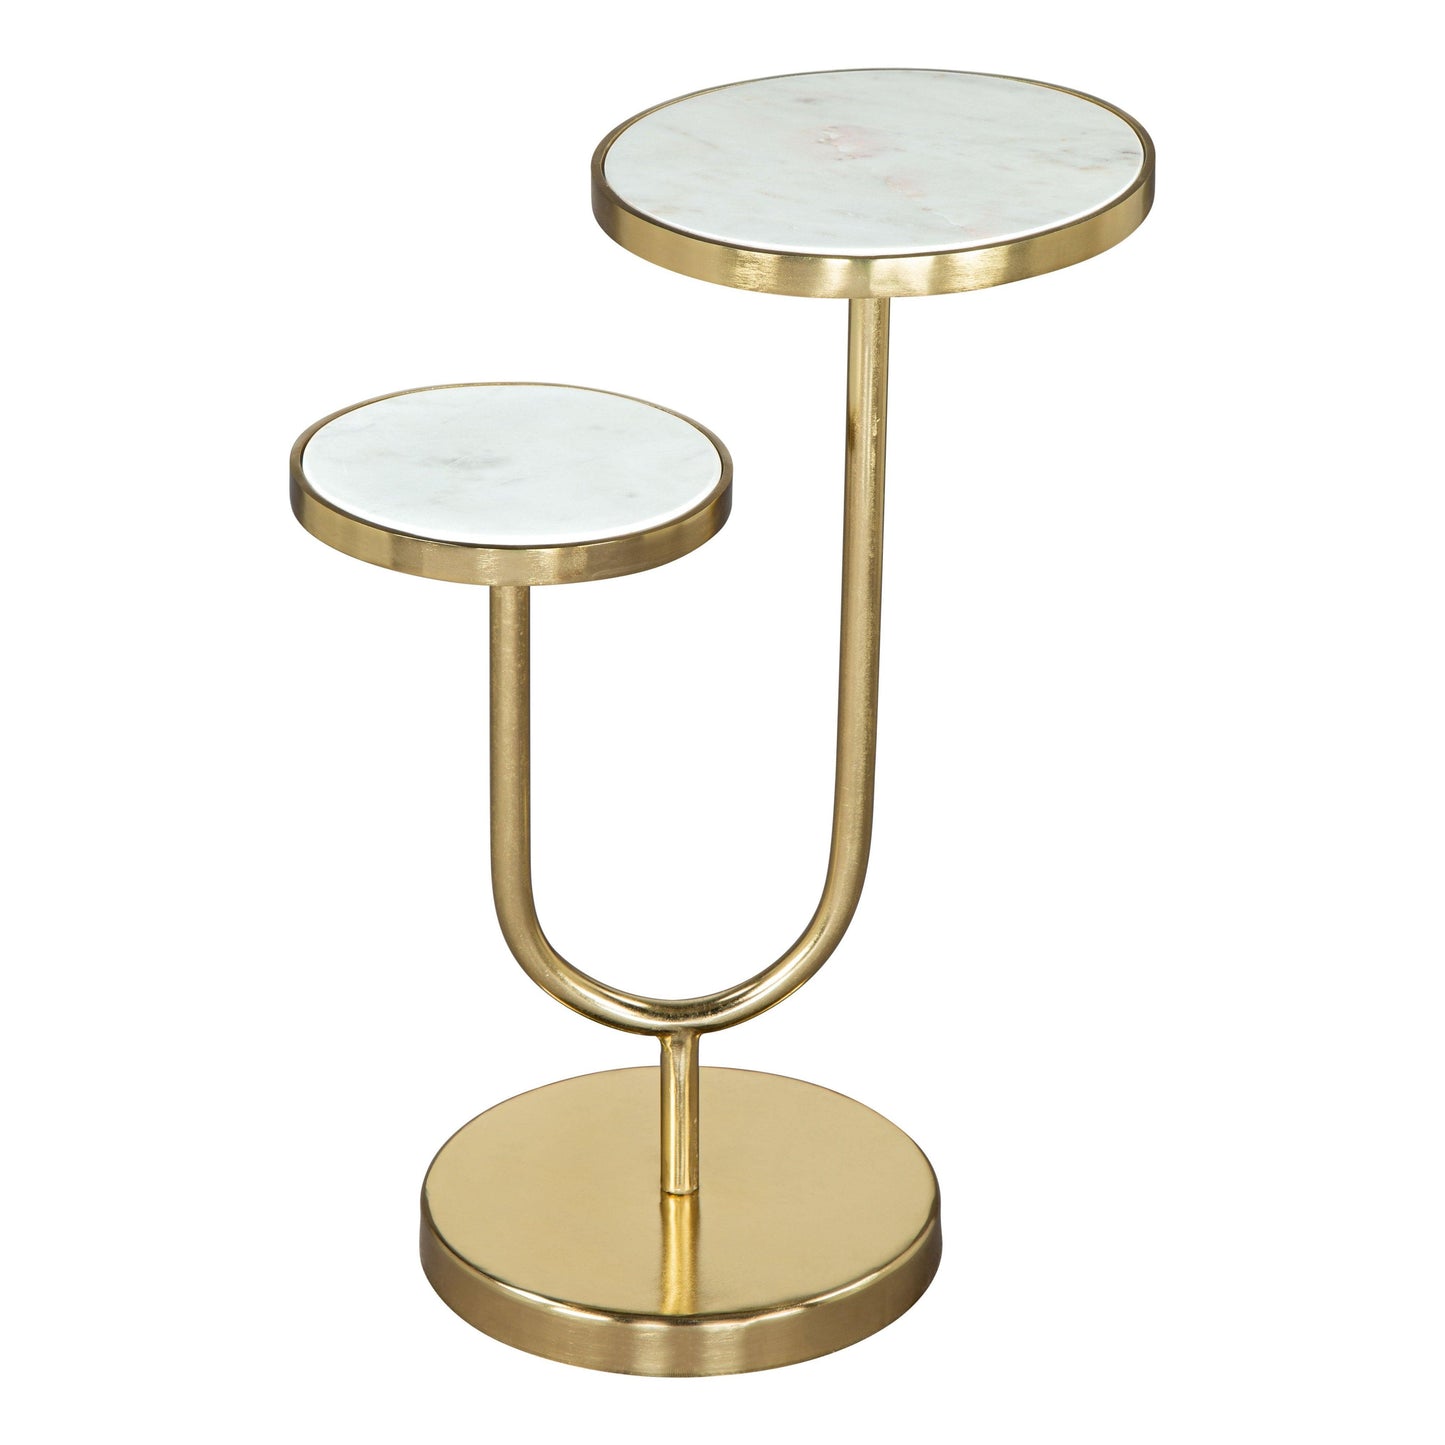 Marc Side Table White & Gold - Sideboards and Things Accents_Gold, Brand_Zuo Modern, Color_Gold, Color_White, Depth_10-20, Finish_Plated, Height_20-30, Materials_Metal, Materials_Stone, Metal Type_Iron, Product Type_Side Table, Stone Type_Marble, Width_10-20